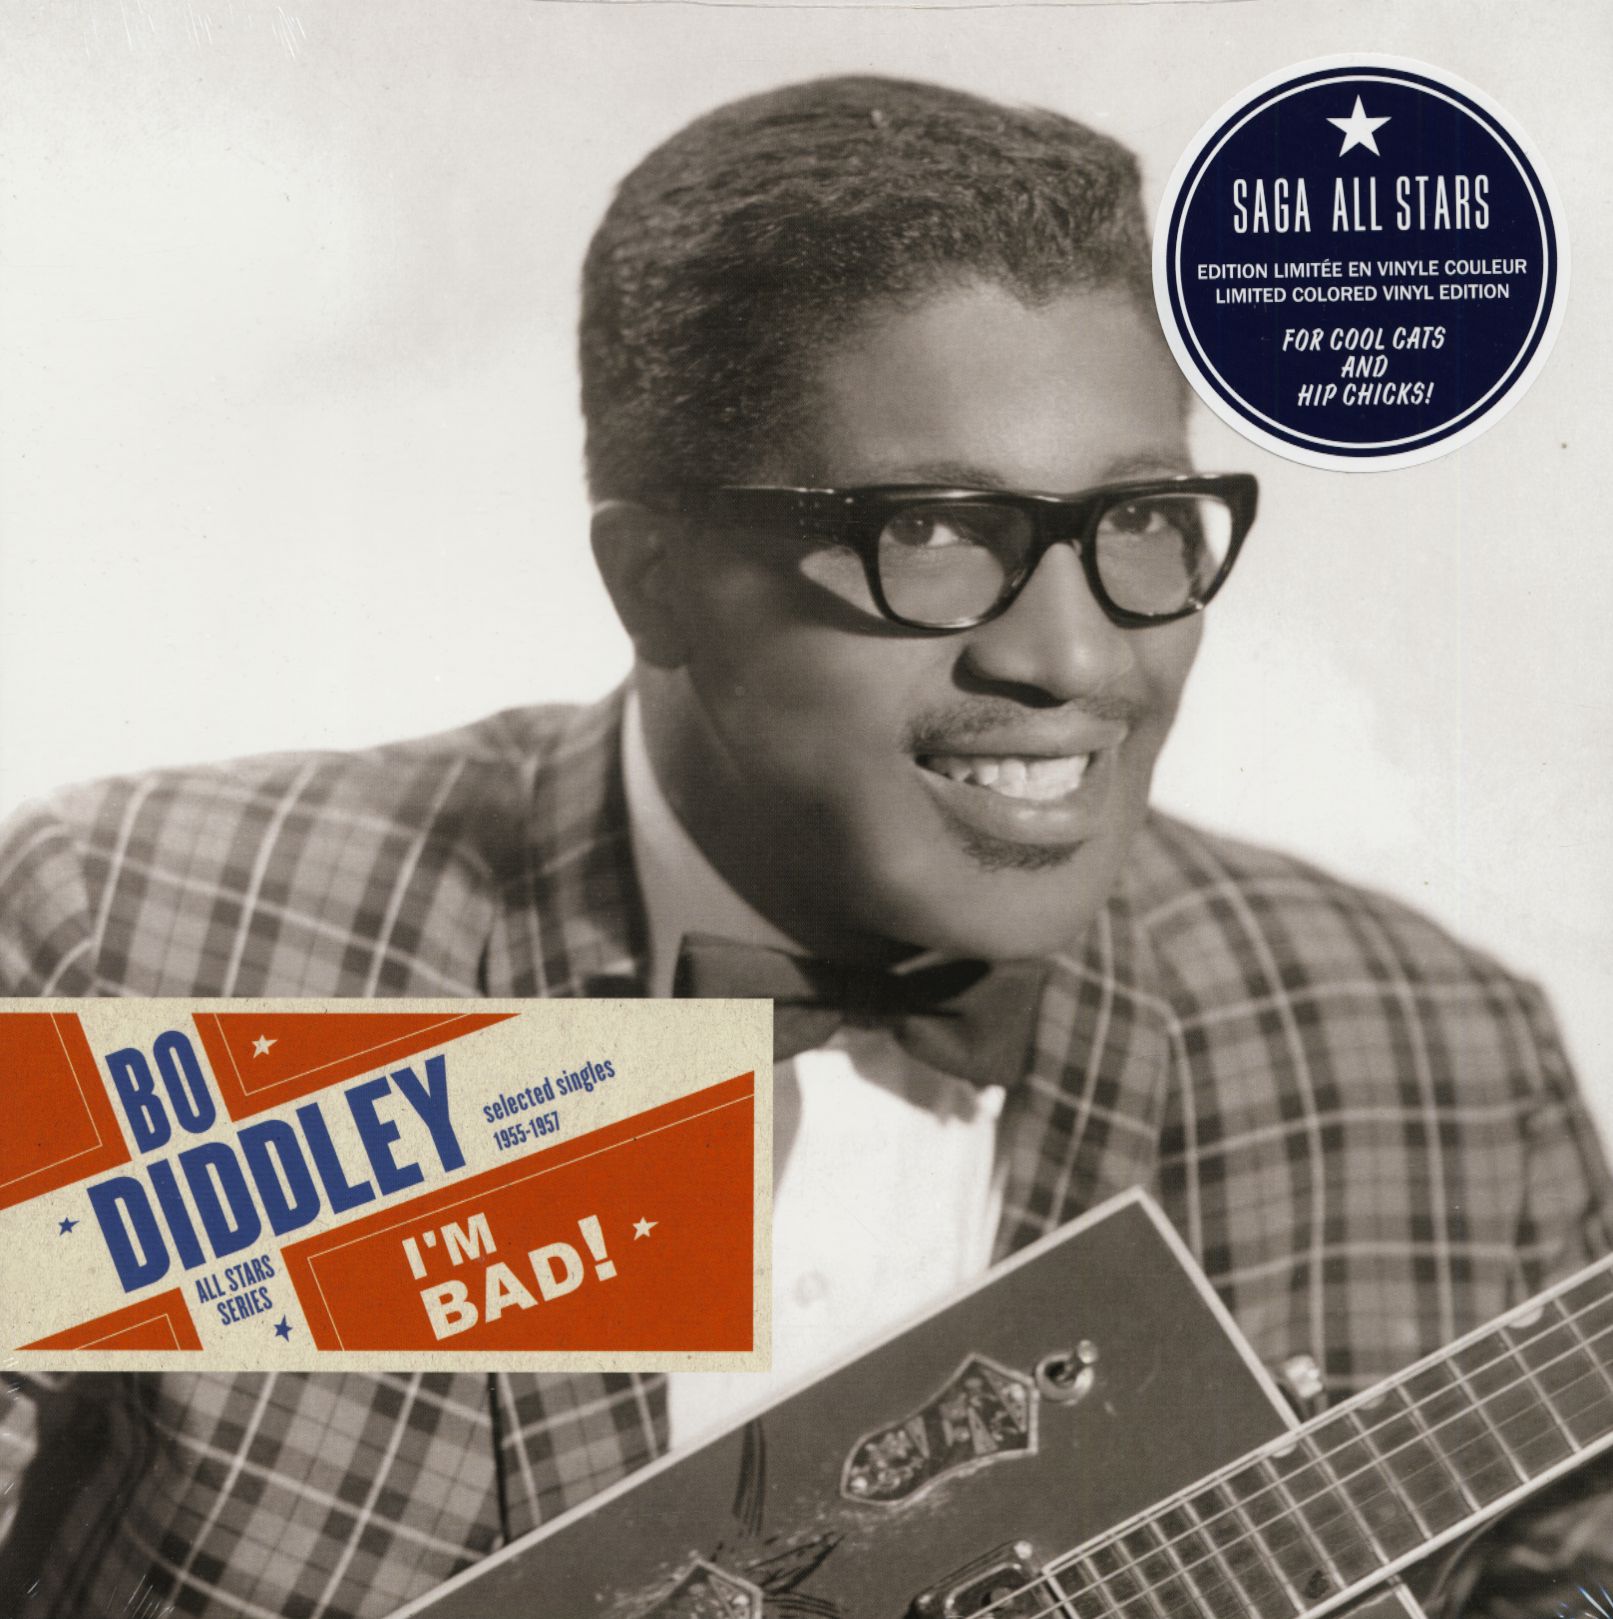 Bo Diddley "I'm Bad!" Colored LP